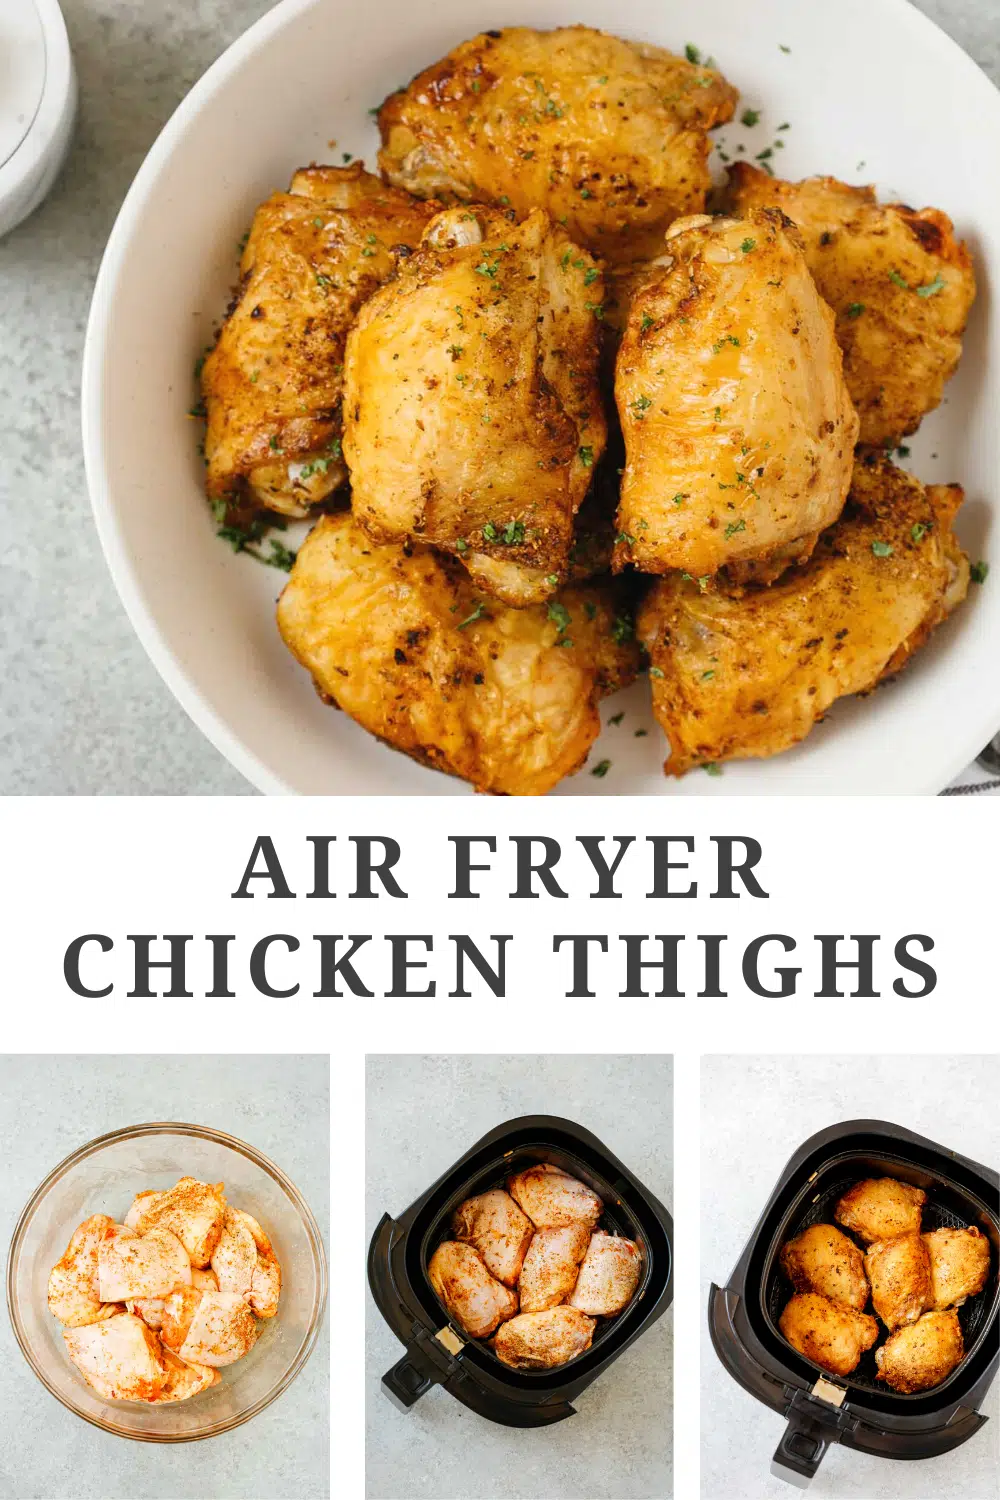 titled photo collage (and shown): air fryer chicken thighs